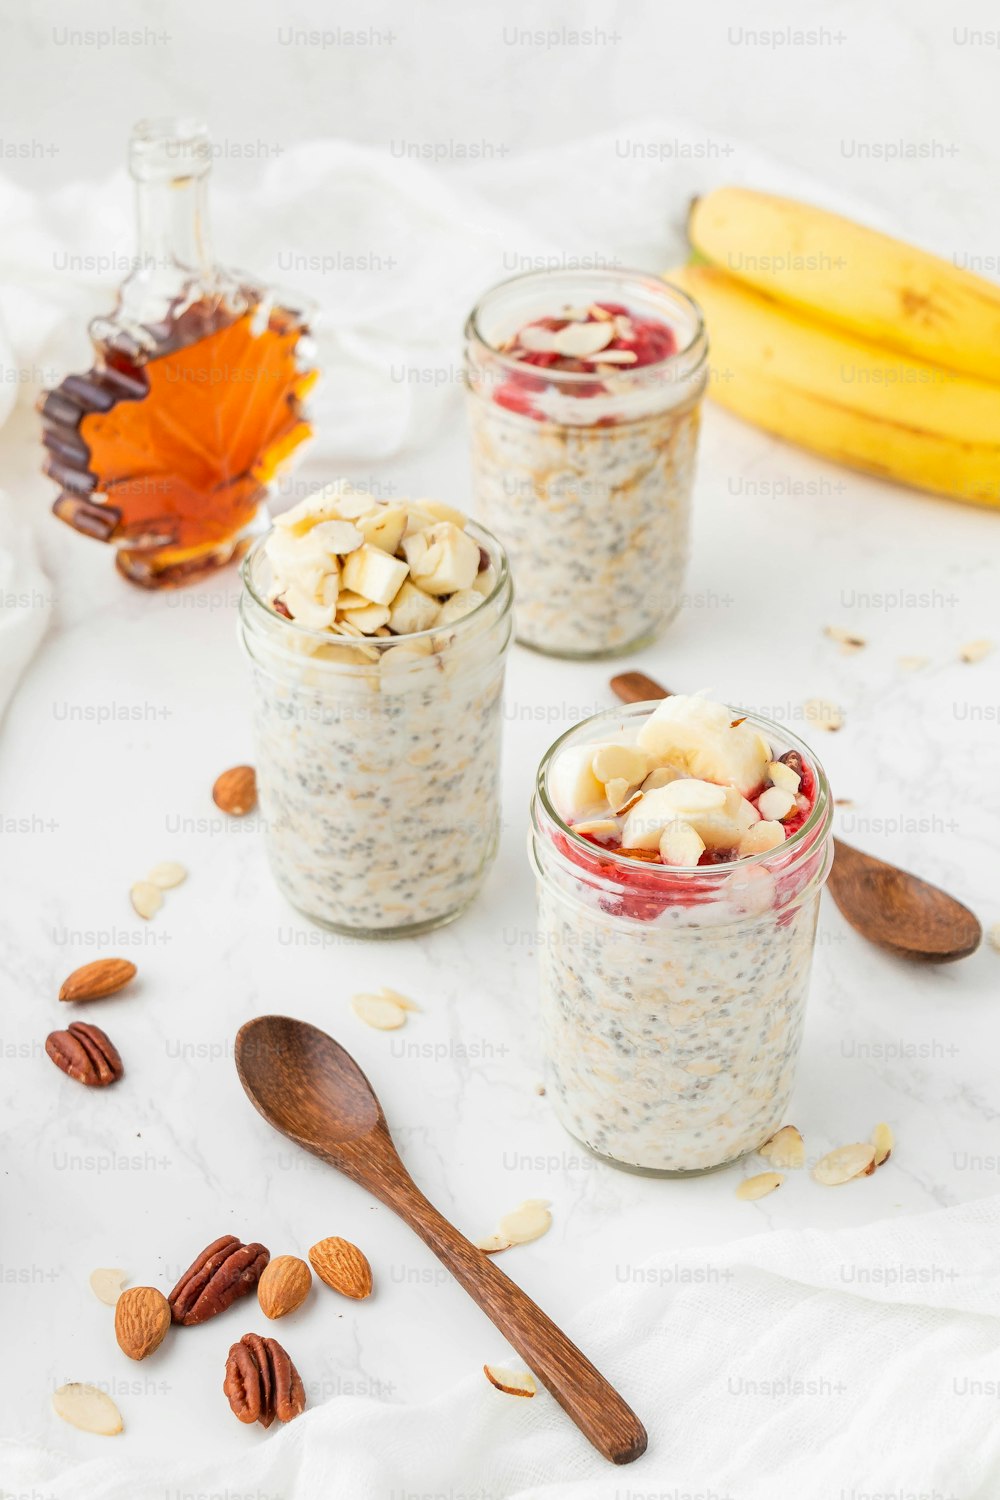 three jars filled with oatmeal and nuts on a table